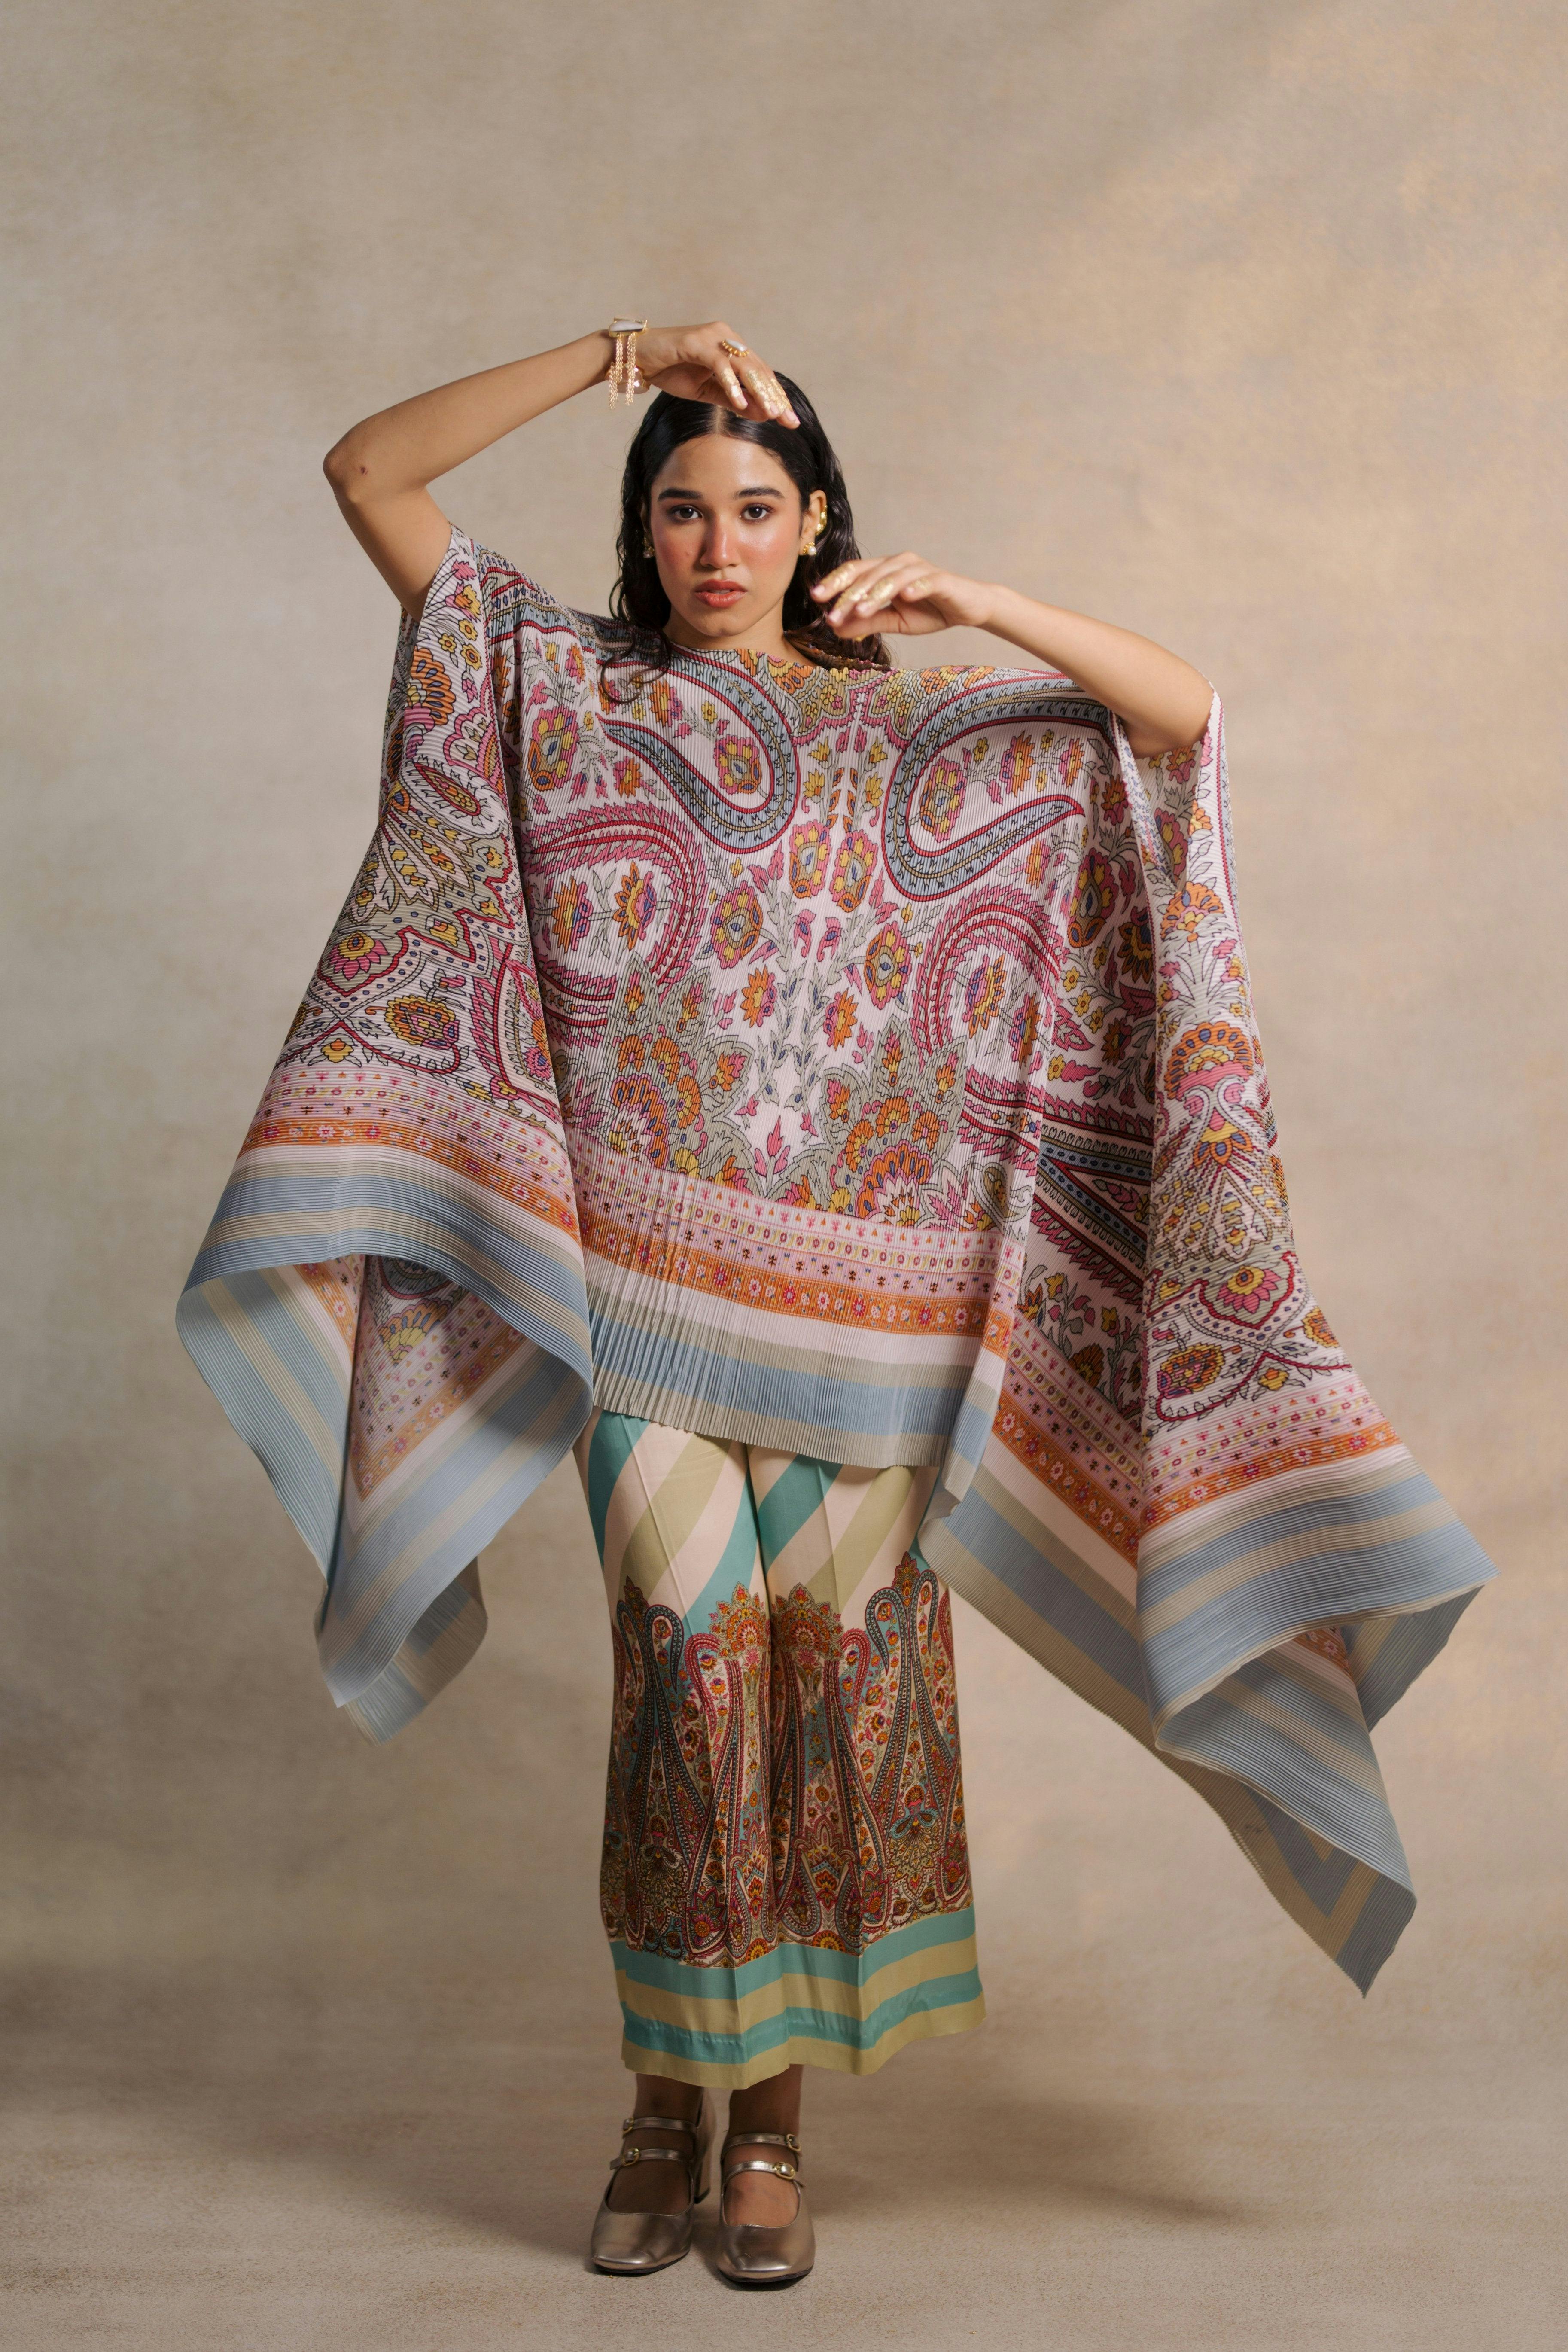 Silk Route Cape, a product by Moh India